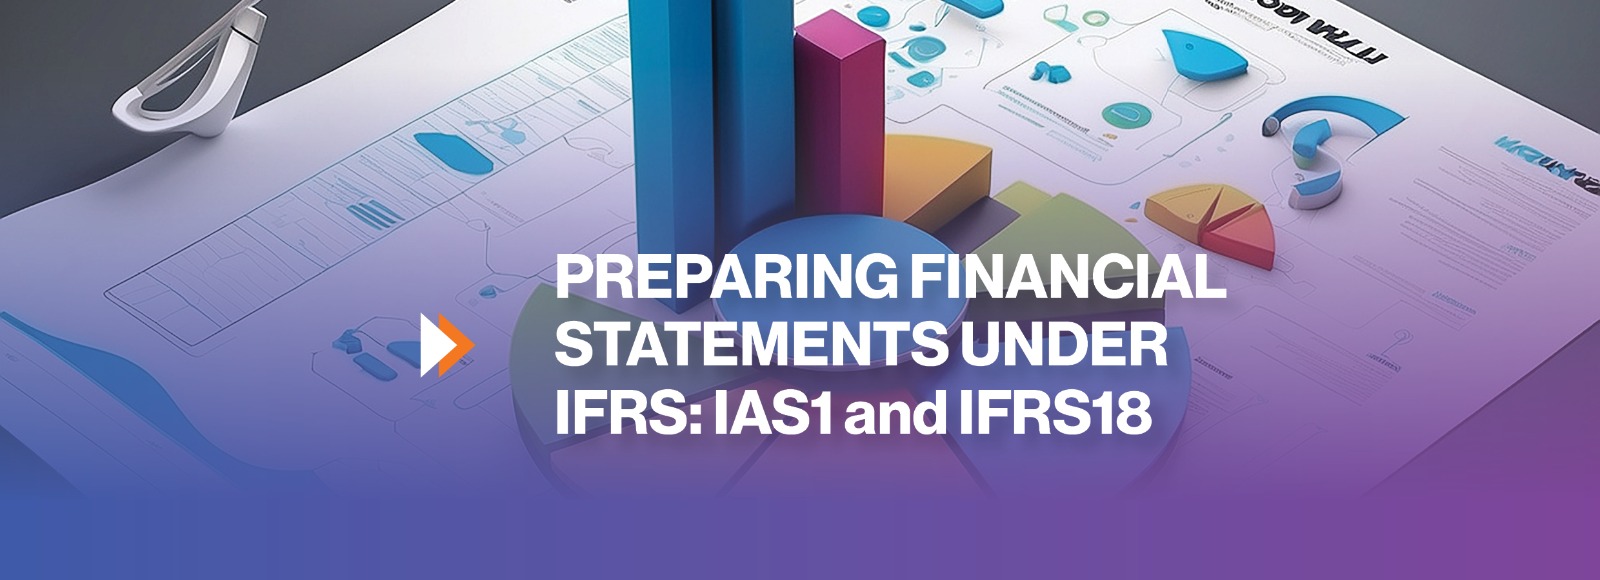 Preparing Financial Statements Under IFRS: IAS1 and IFRS18